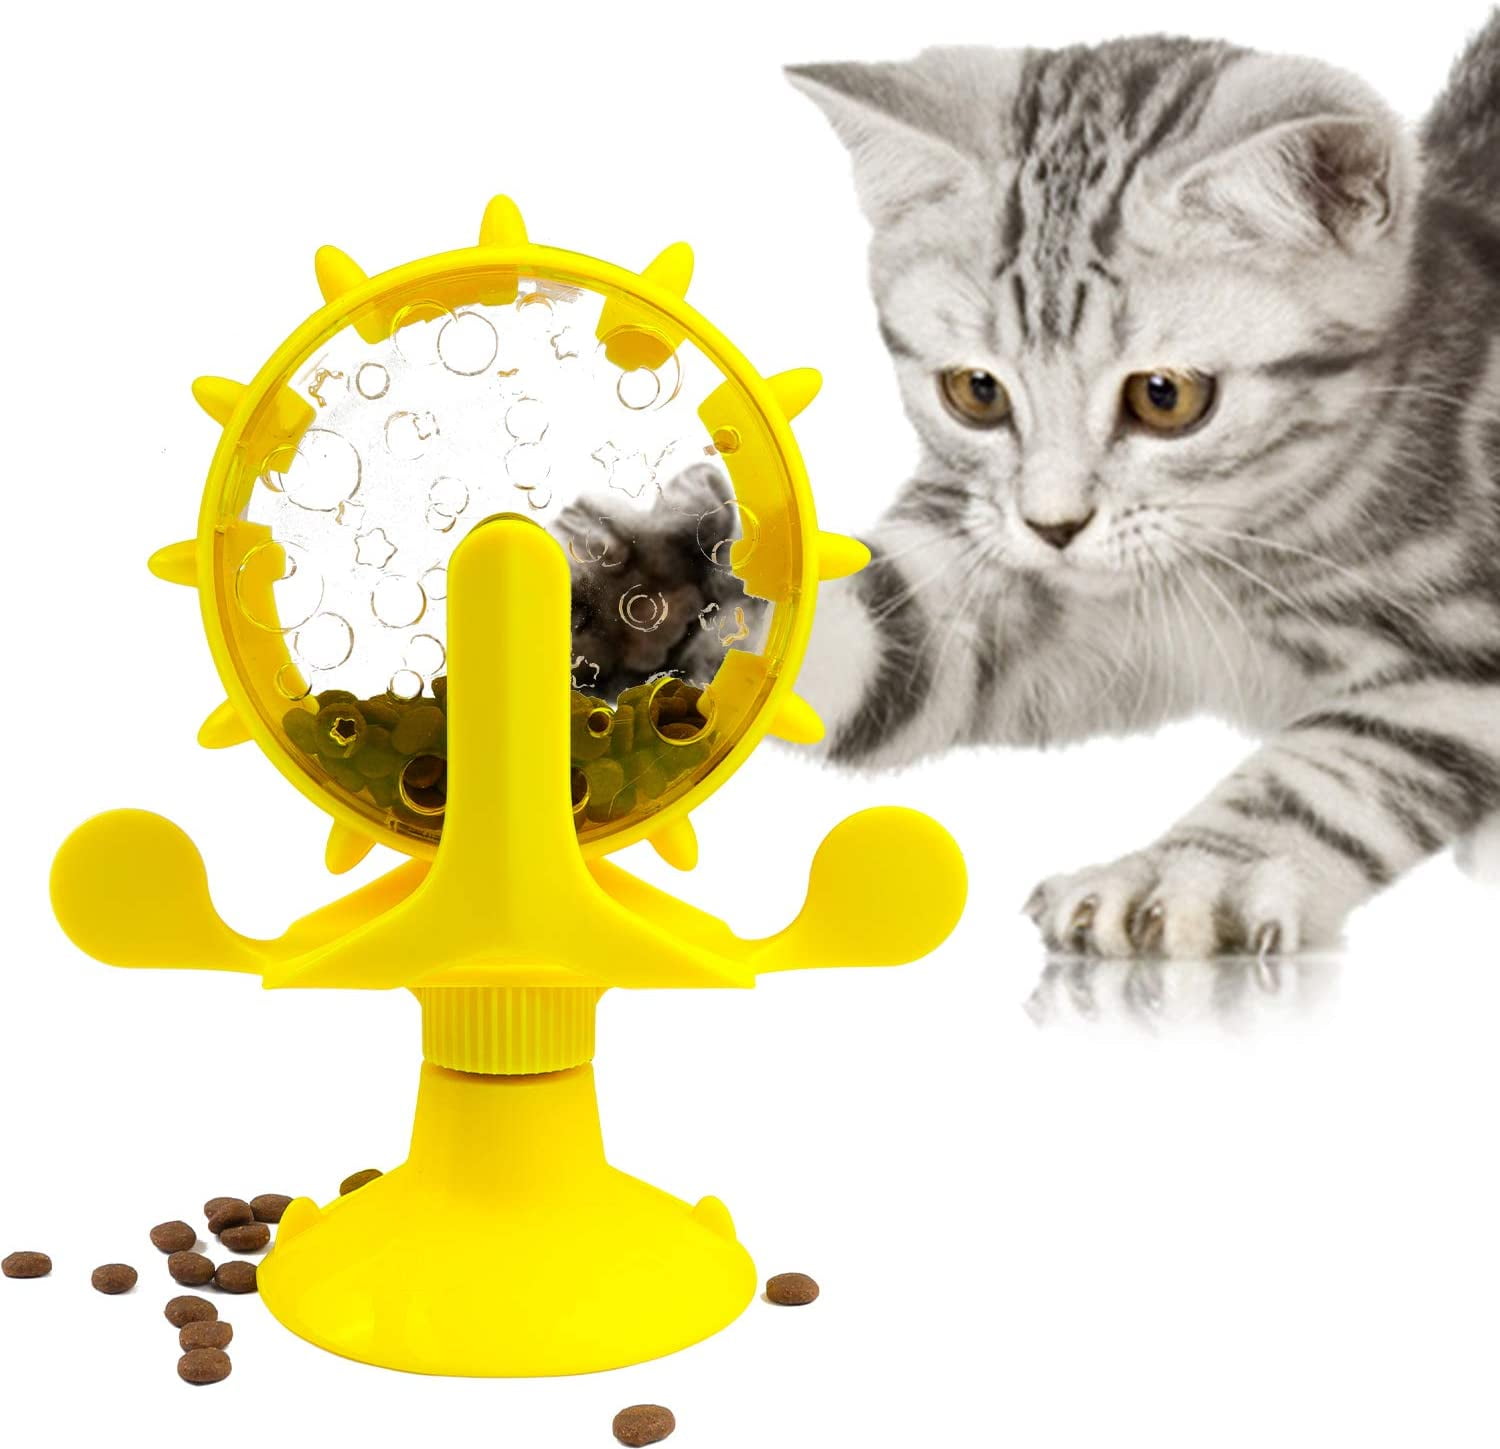 New Solid Wood Rotary Table Cat Toys Pet Food Utensils New Puzzle Tumbler  Leakage Ball - China Pet Toys and Cat Toys price